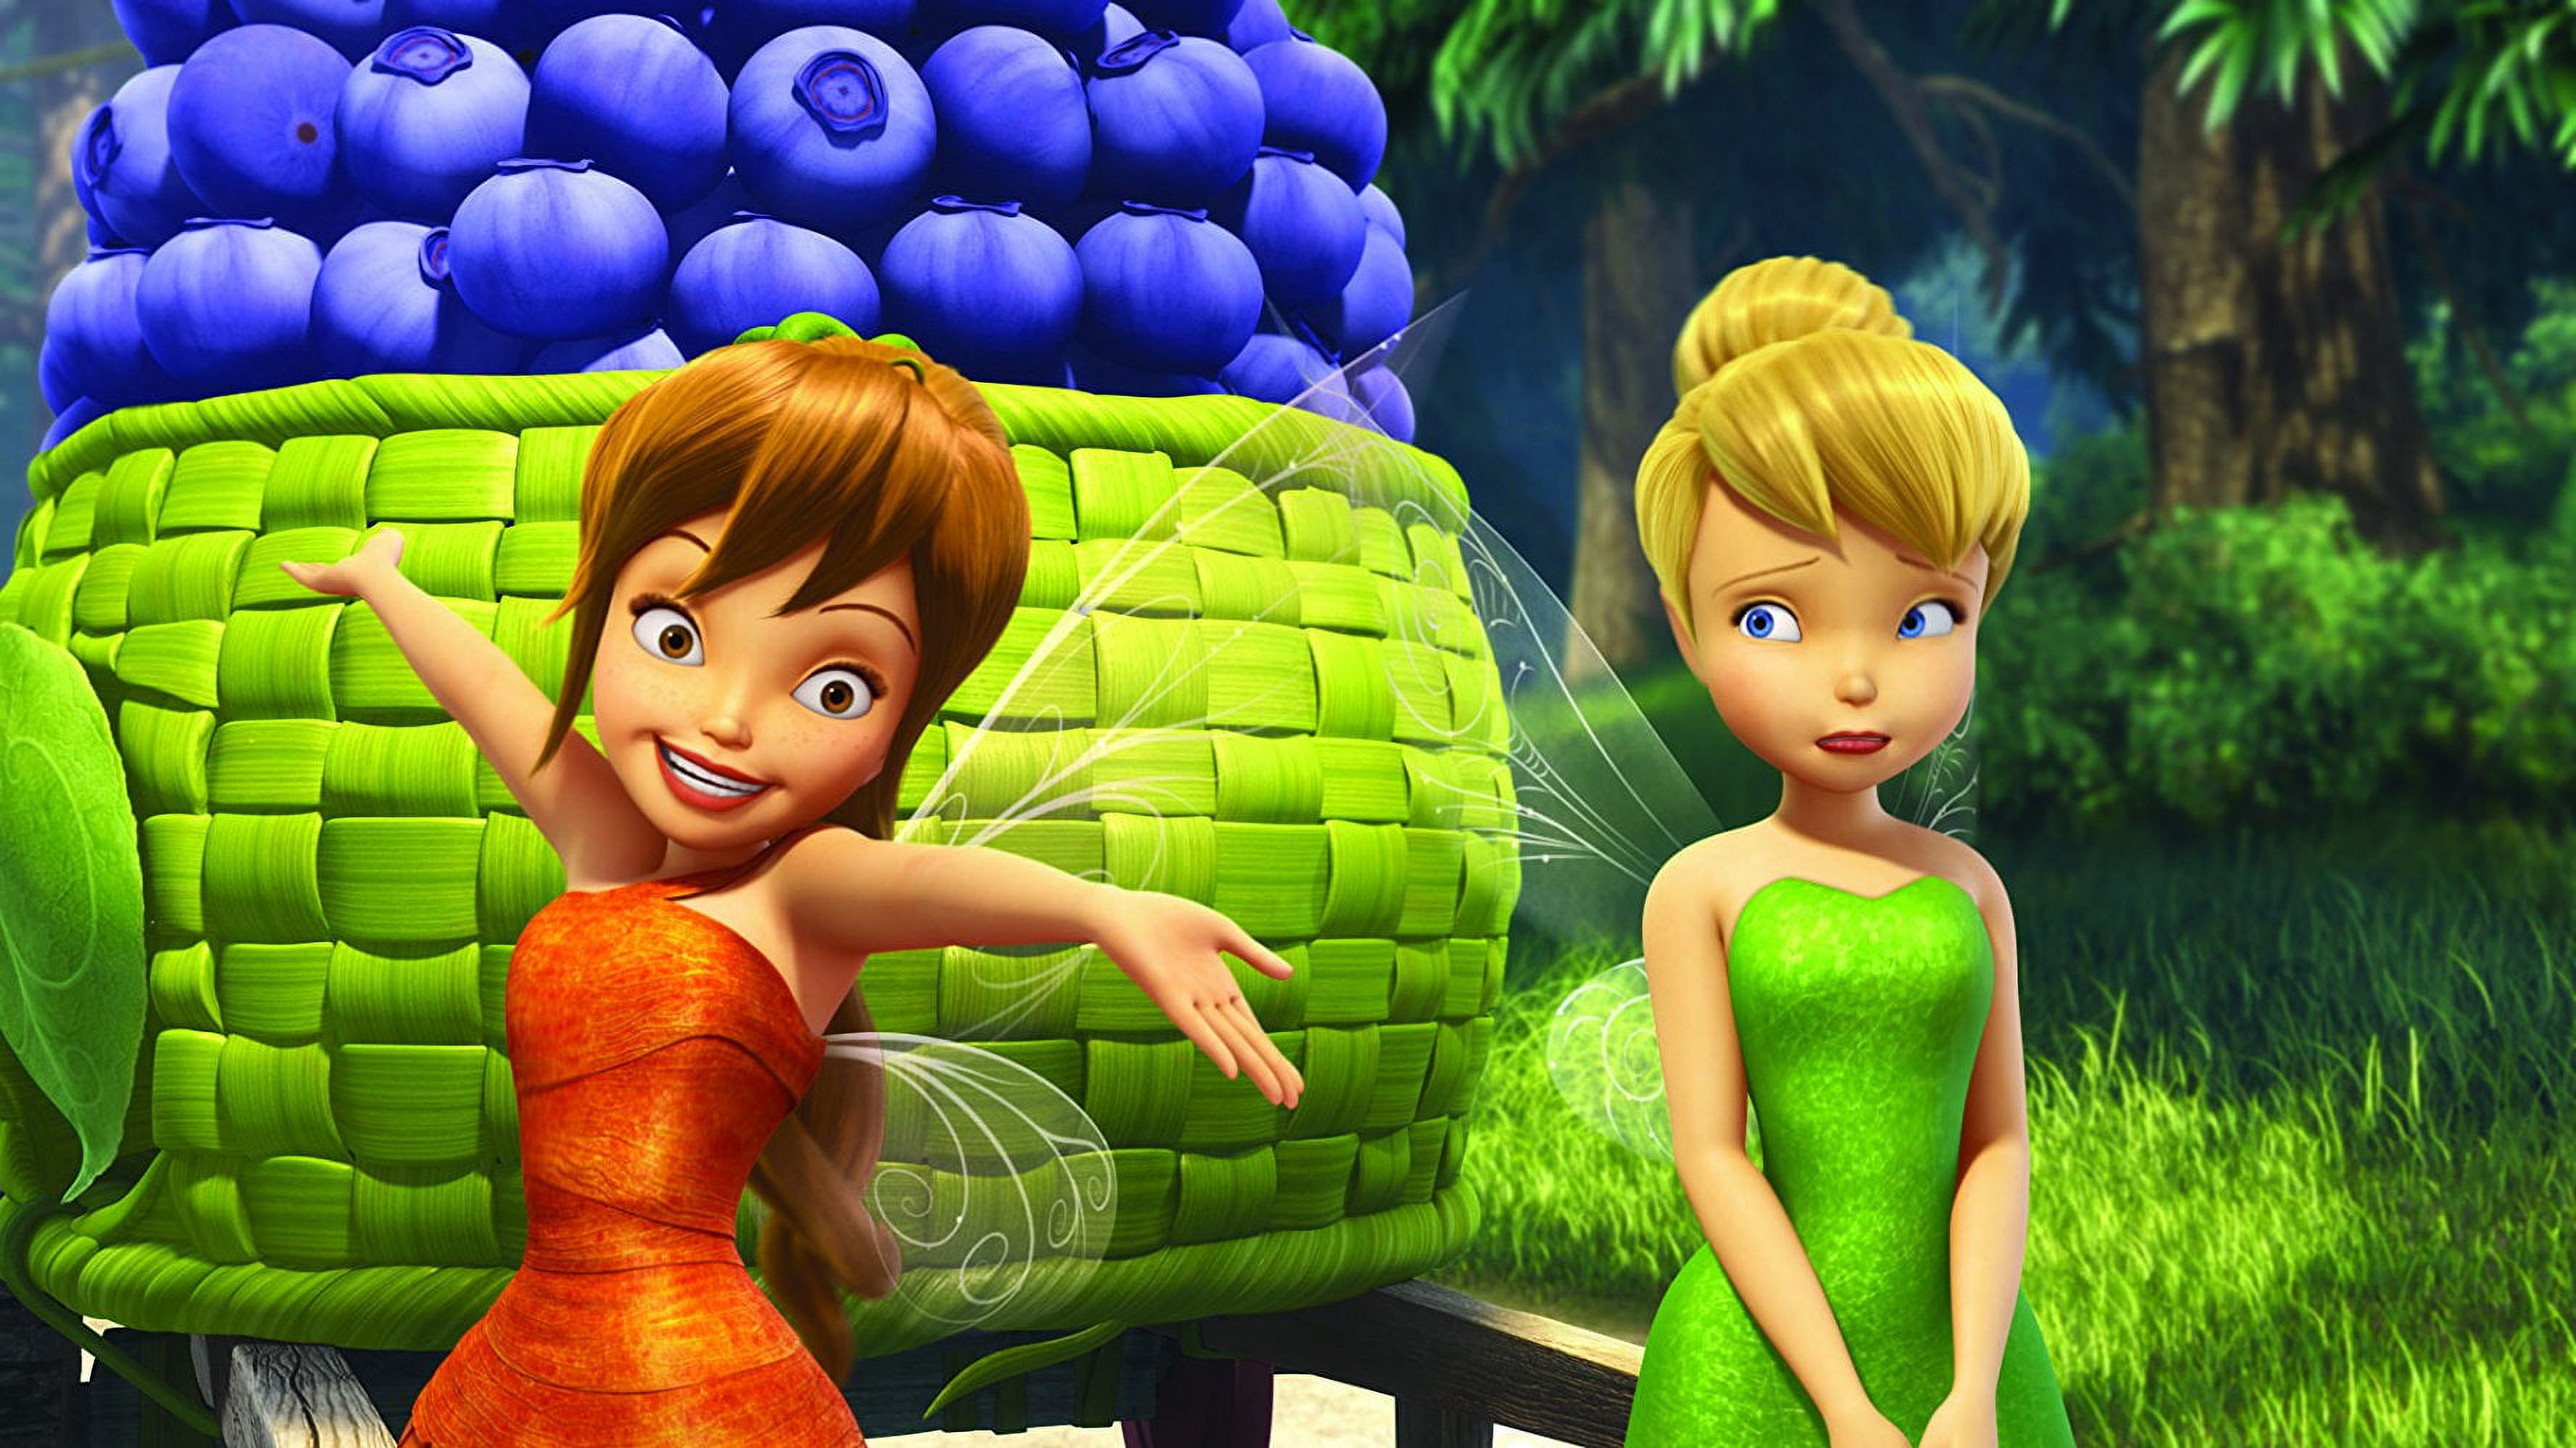 Tinker Bell and the Legend of the NeverBeast (Blu-ray + DVD) - image 4 of 5